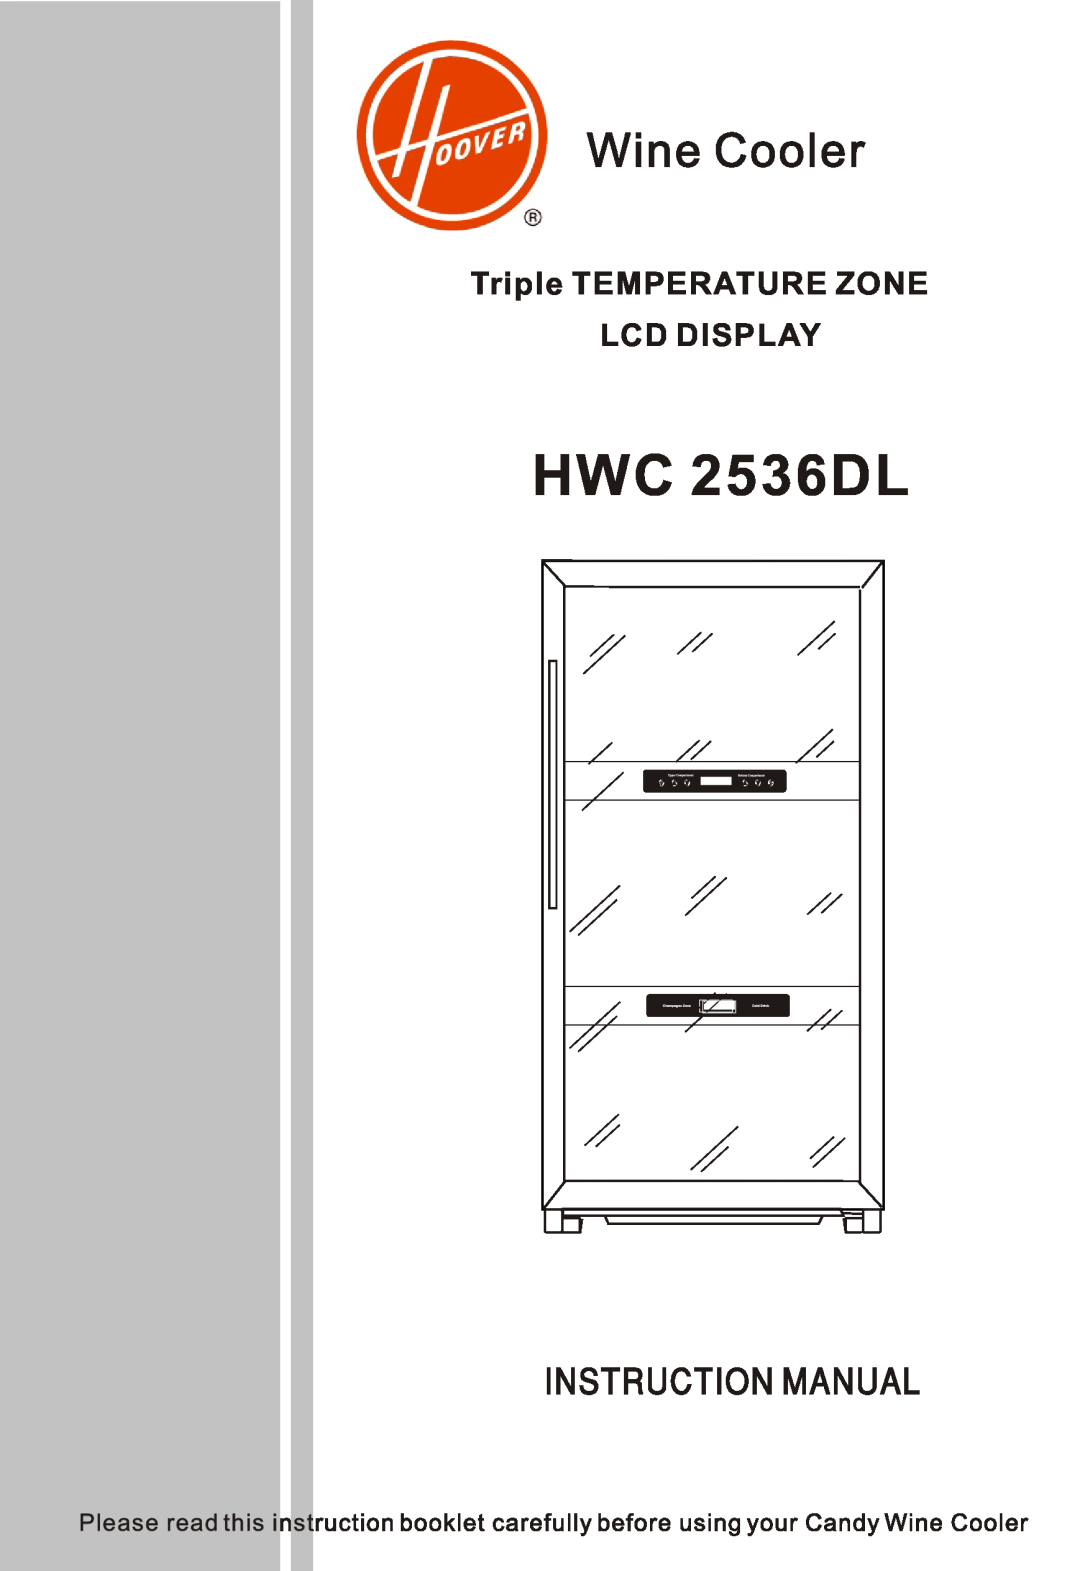 Hoover HWC 2536DL instruction manual Wine Cooler, Triple TEMPERATURE ZONE LCD DISPLAY 